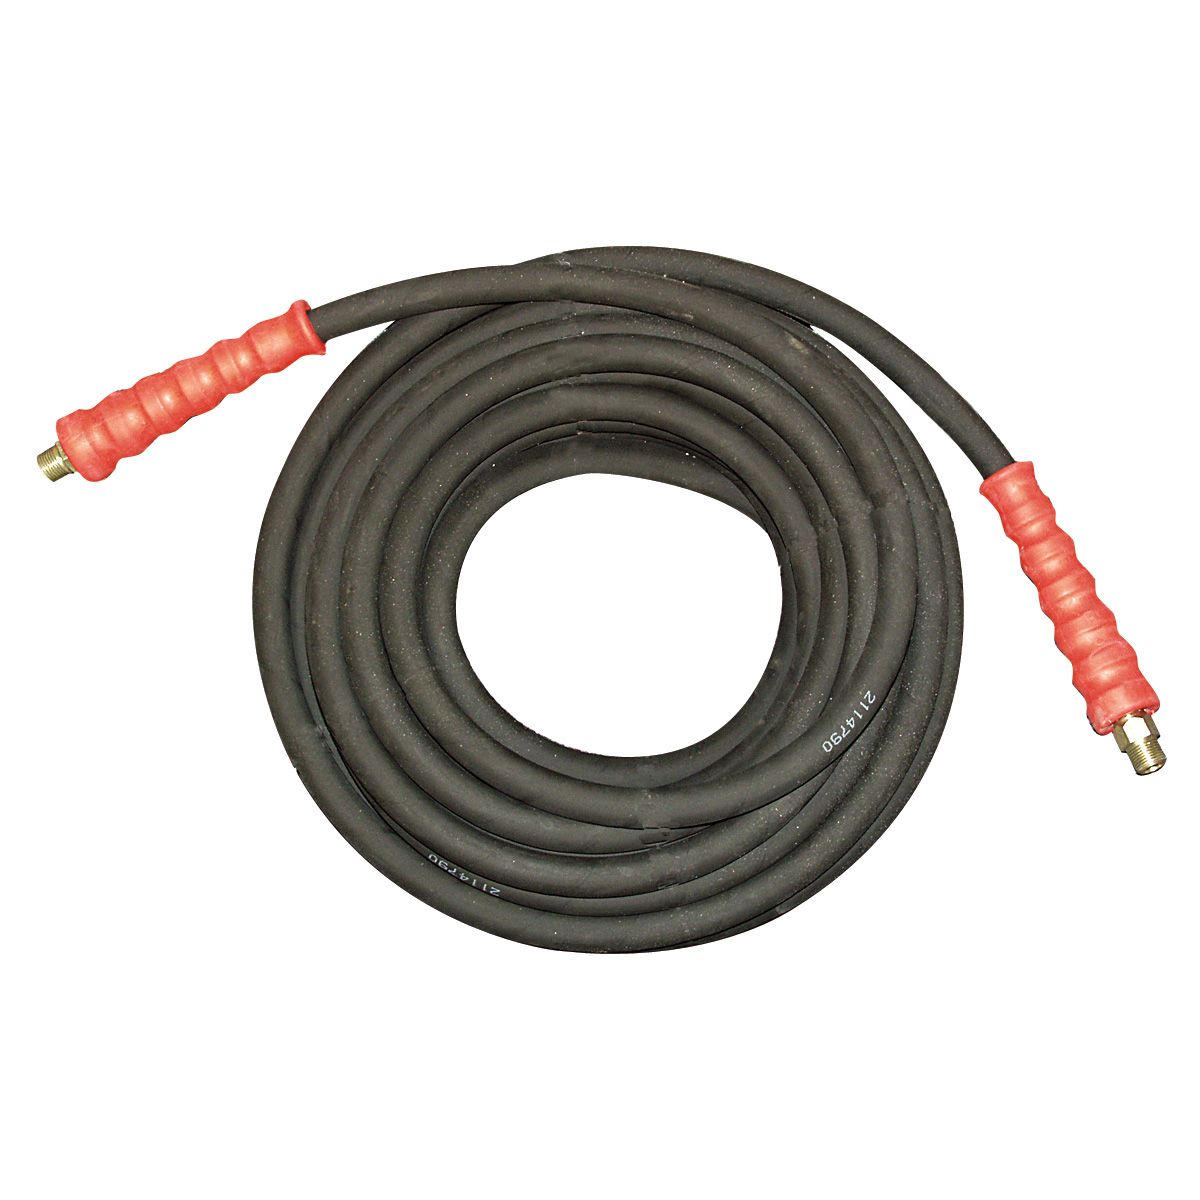 Hot Water Pressure Washer Hose 50' w/o Couplers 6000 PSI 50 FT 2 Wire Braid 